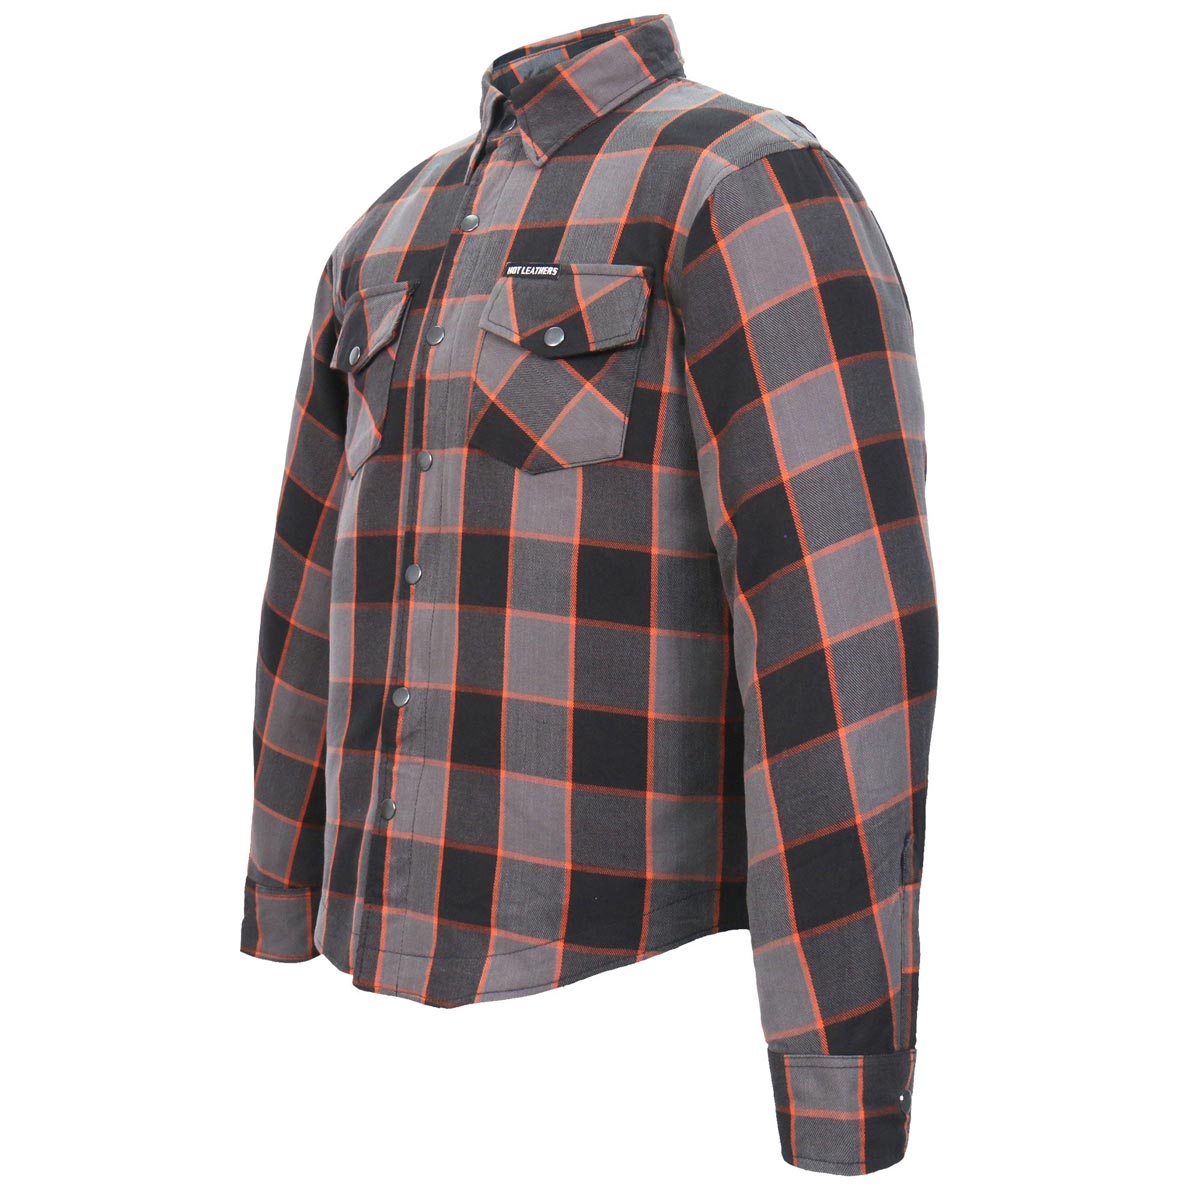 Hot Leathers JKM3010 Men's Black/Grey/Orange Armored Flannel Motorcycle Shirt-Jacket w/ CE Armor Protection